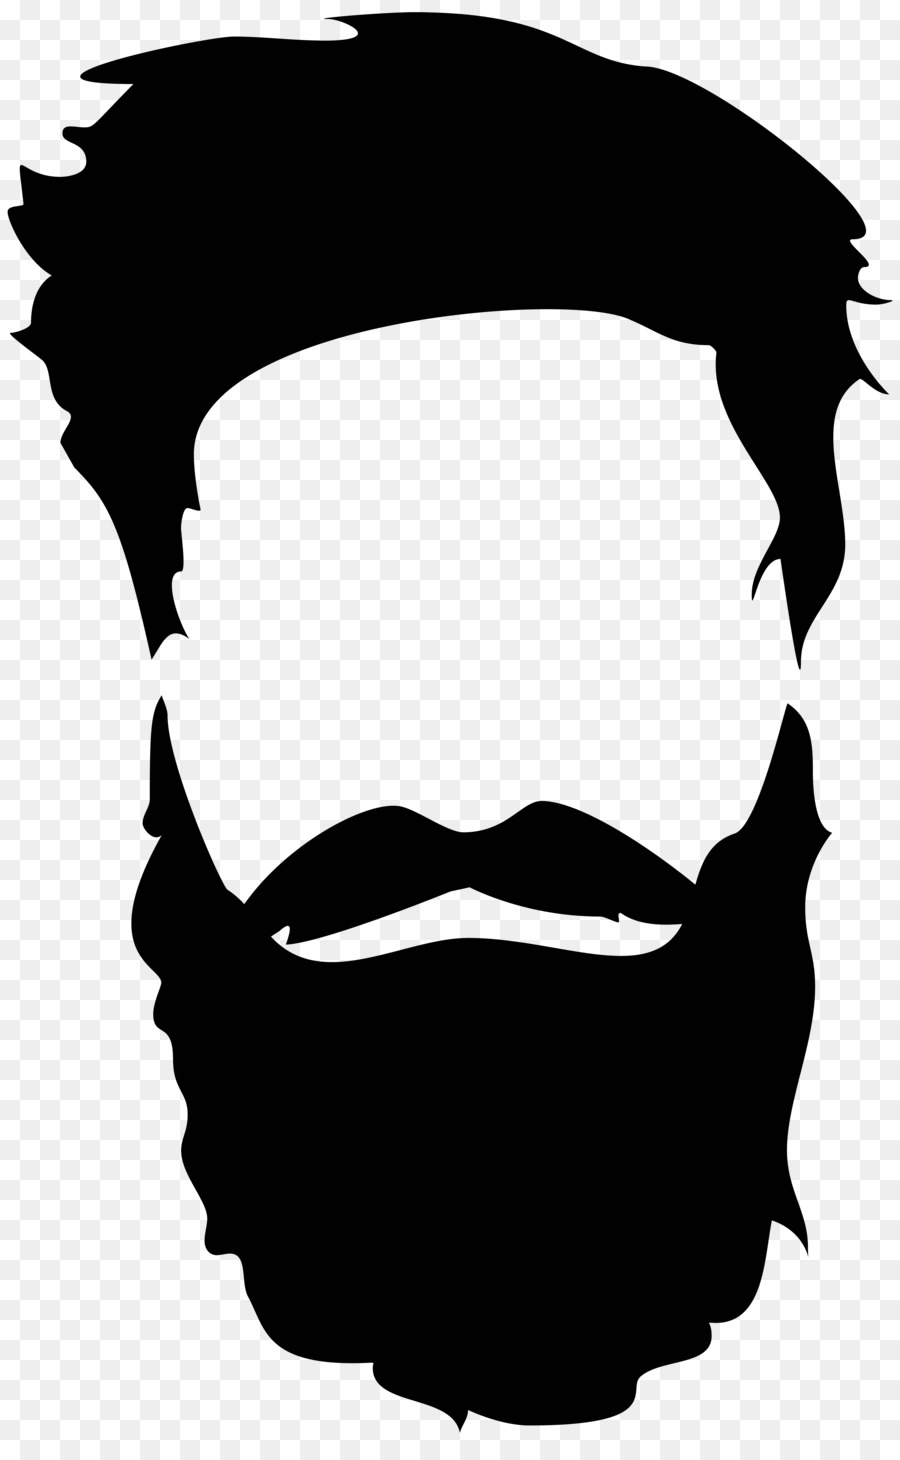 Beard Silhouette Royalty-free - beard and moustache png download - 4983*8000 - Free Transparent Beard png Download.